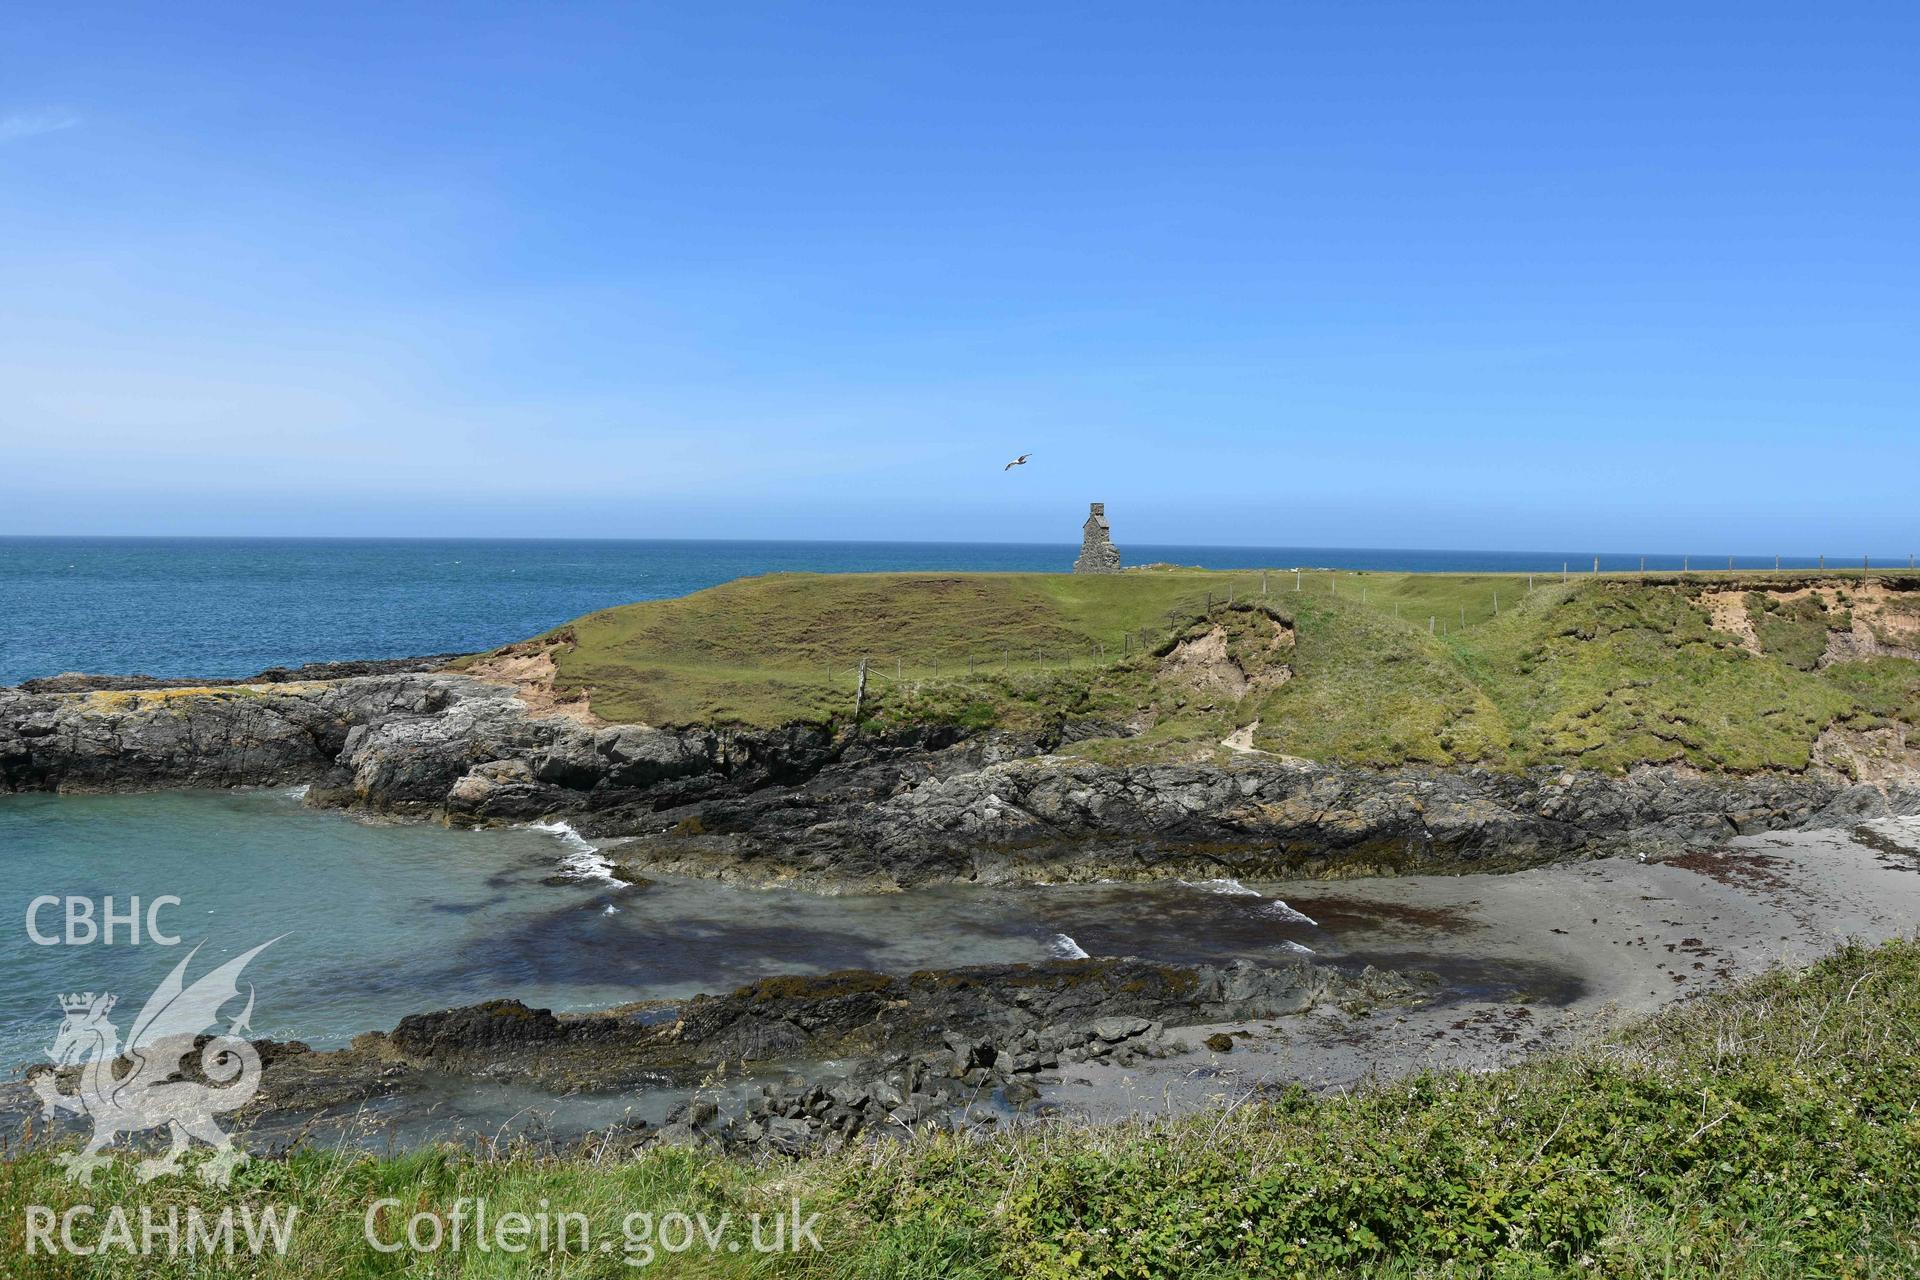 Custom Officer’s House, Porth Ysgaden. Distant view from the south. Photographed by Louise Barker of RCAHMW, 9th June 2017. Produced with EU funds through the Ireland Wales Co-operation Programme 2014-2023. All material made freely available through the Open Government Licence.